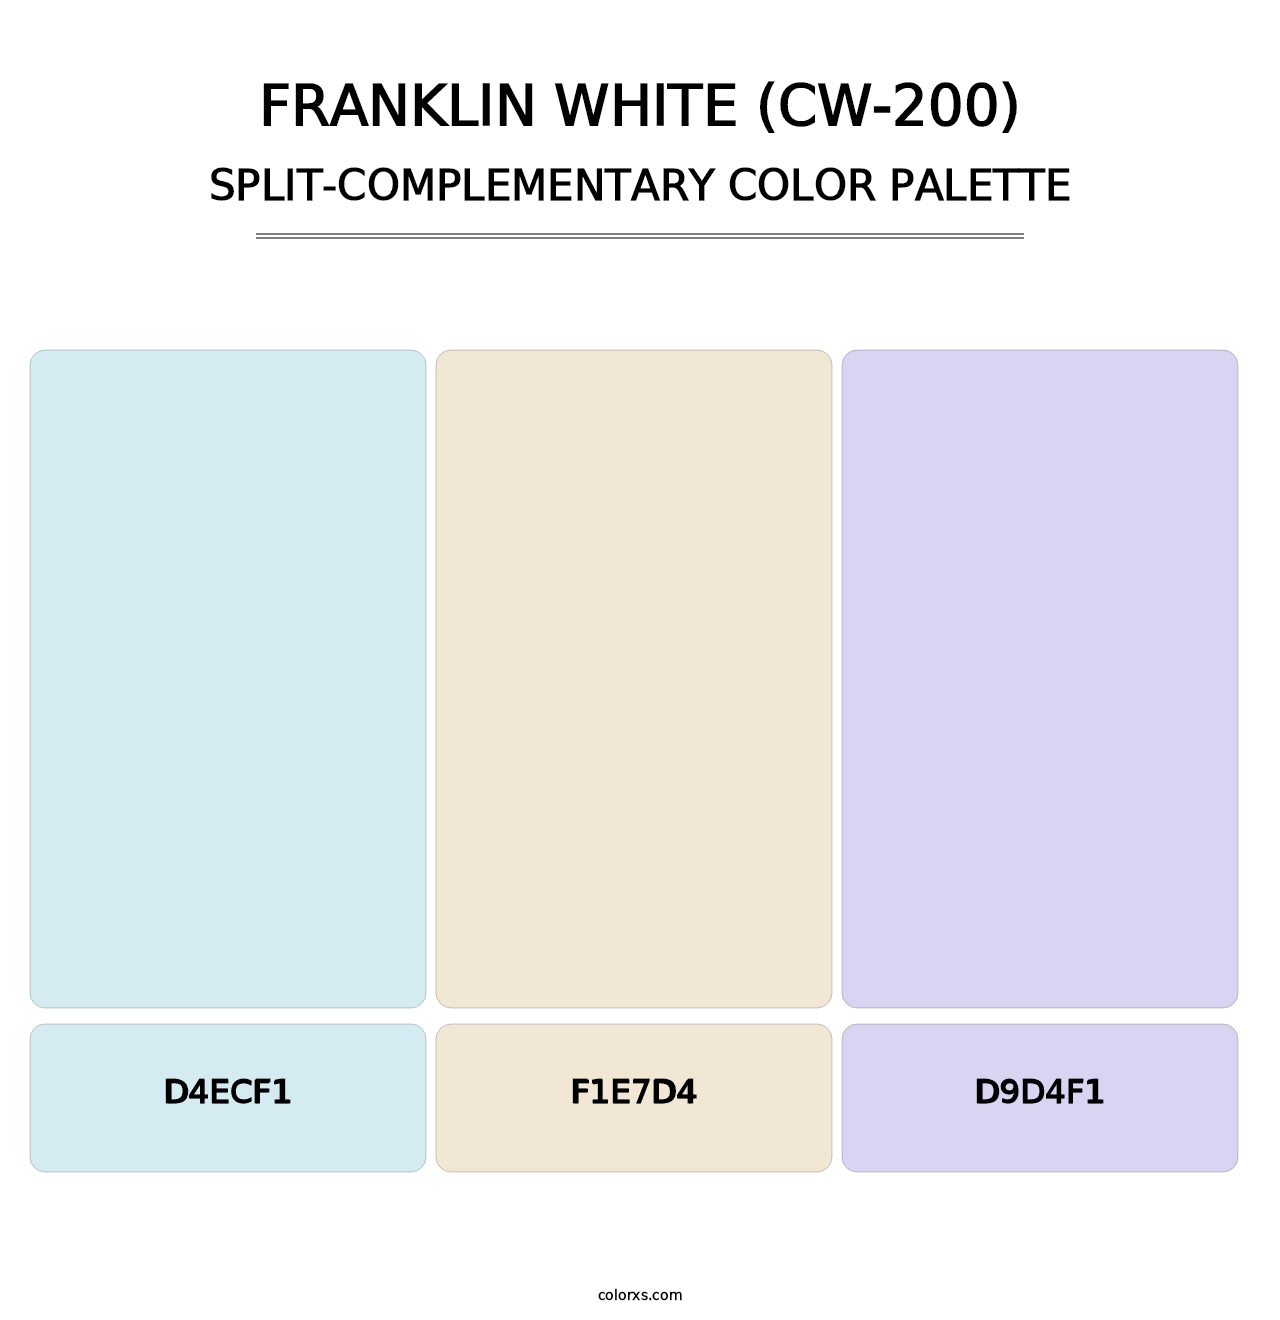 Franklin White (CW-200) - Split-Complementary Color Palette